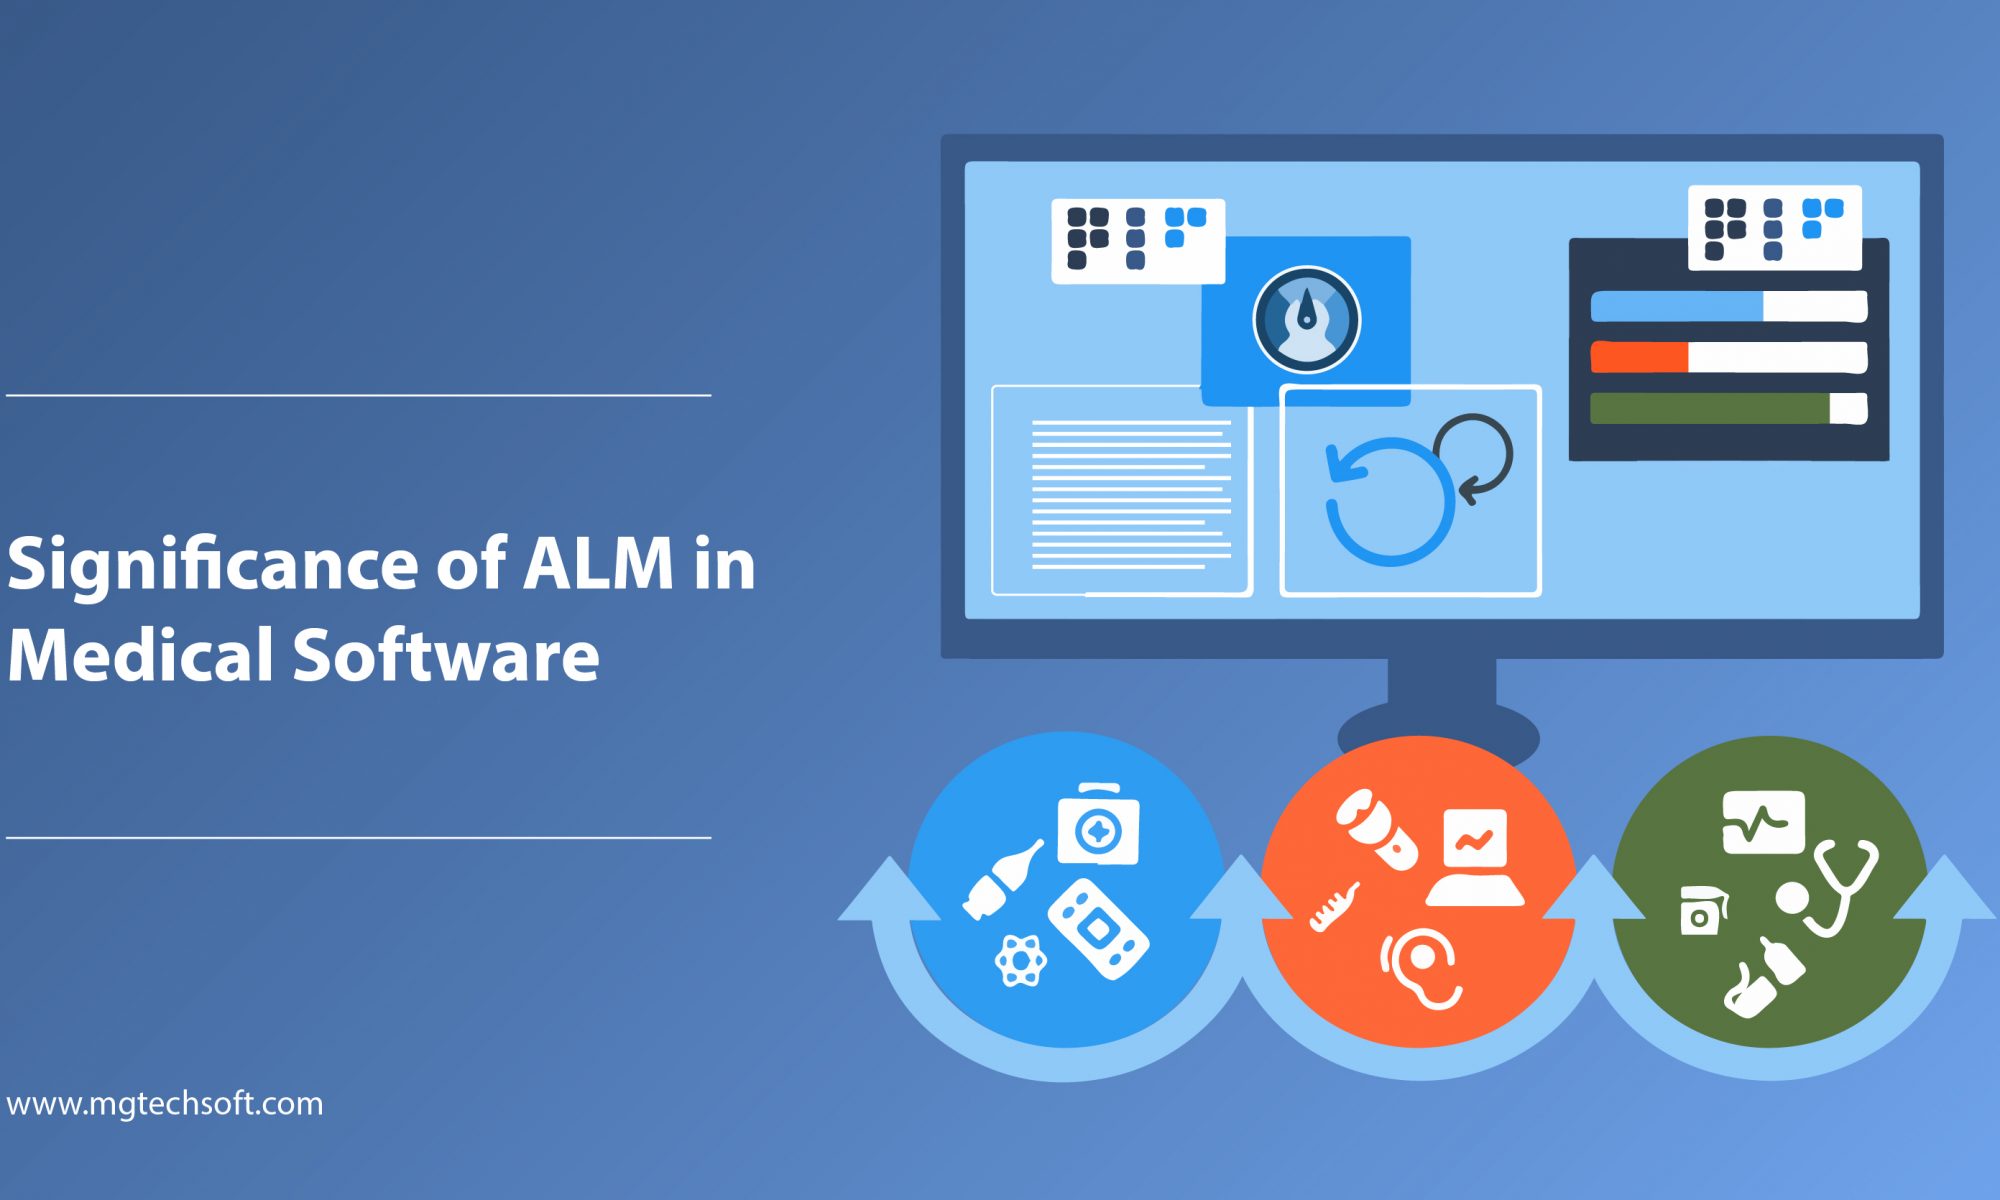 Significance of ALM in Medical Software